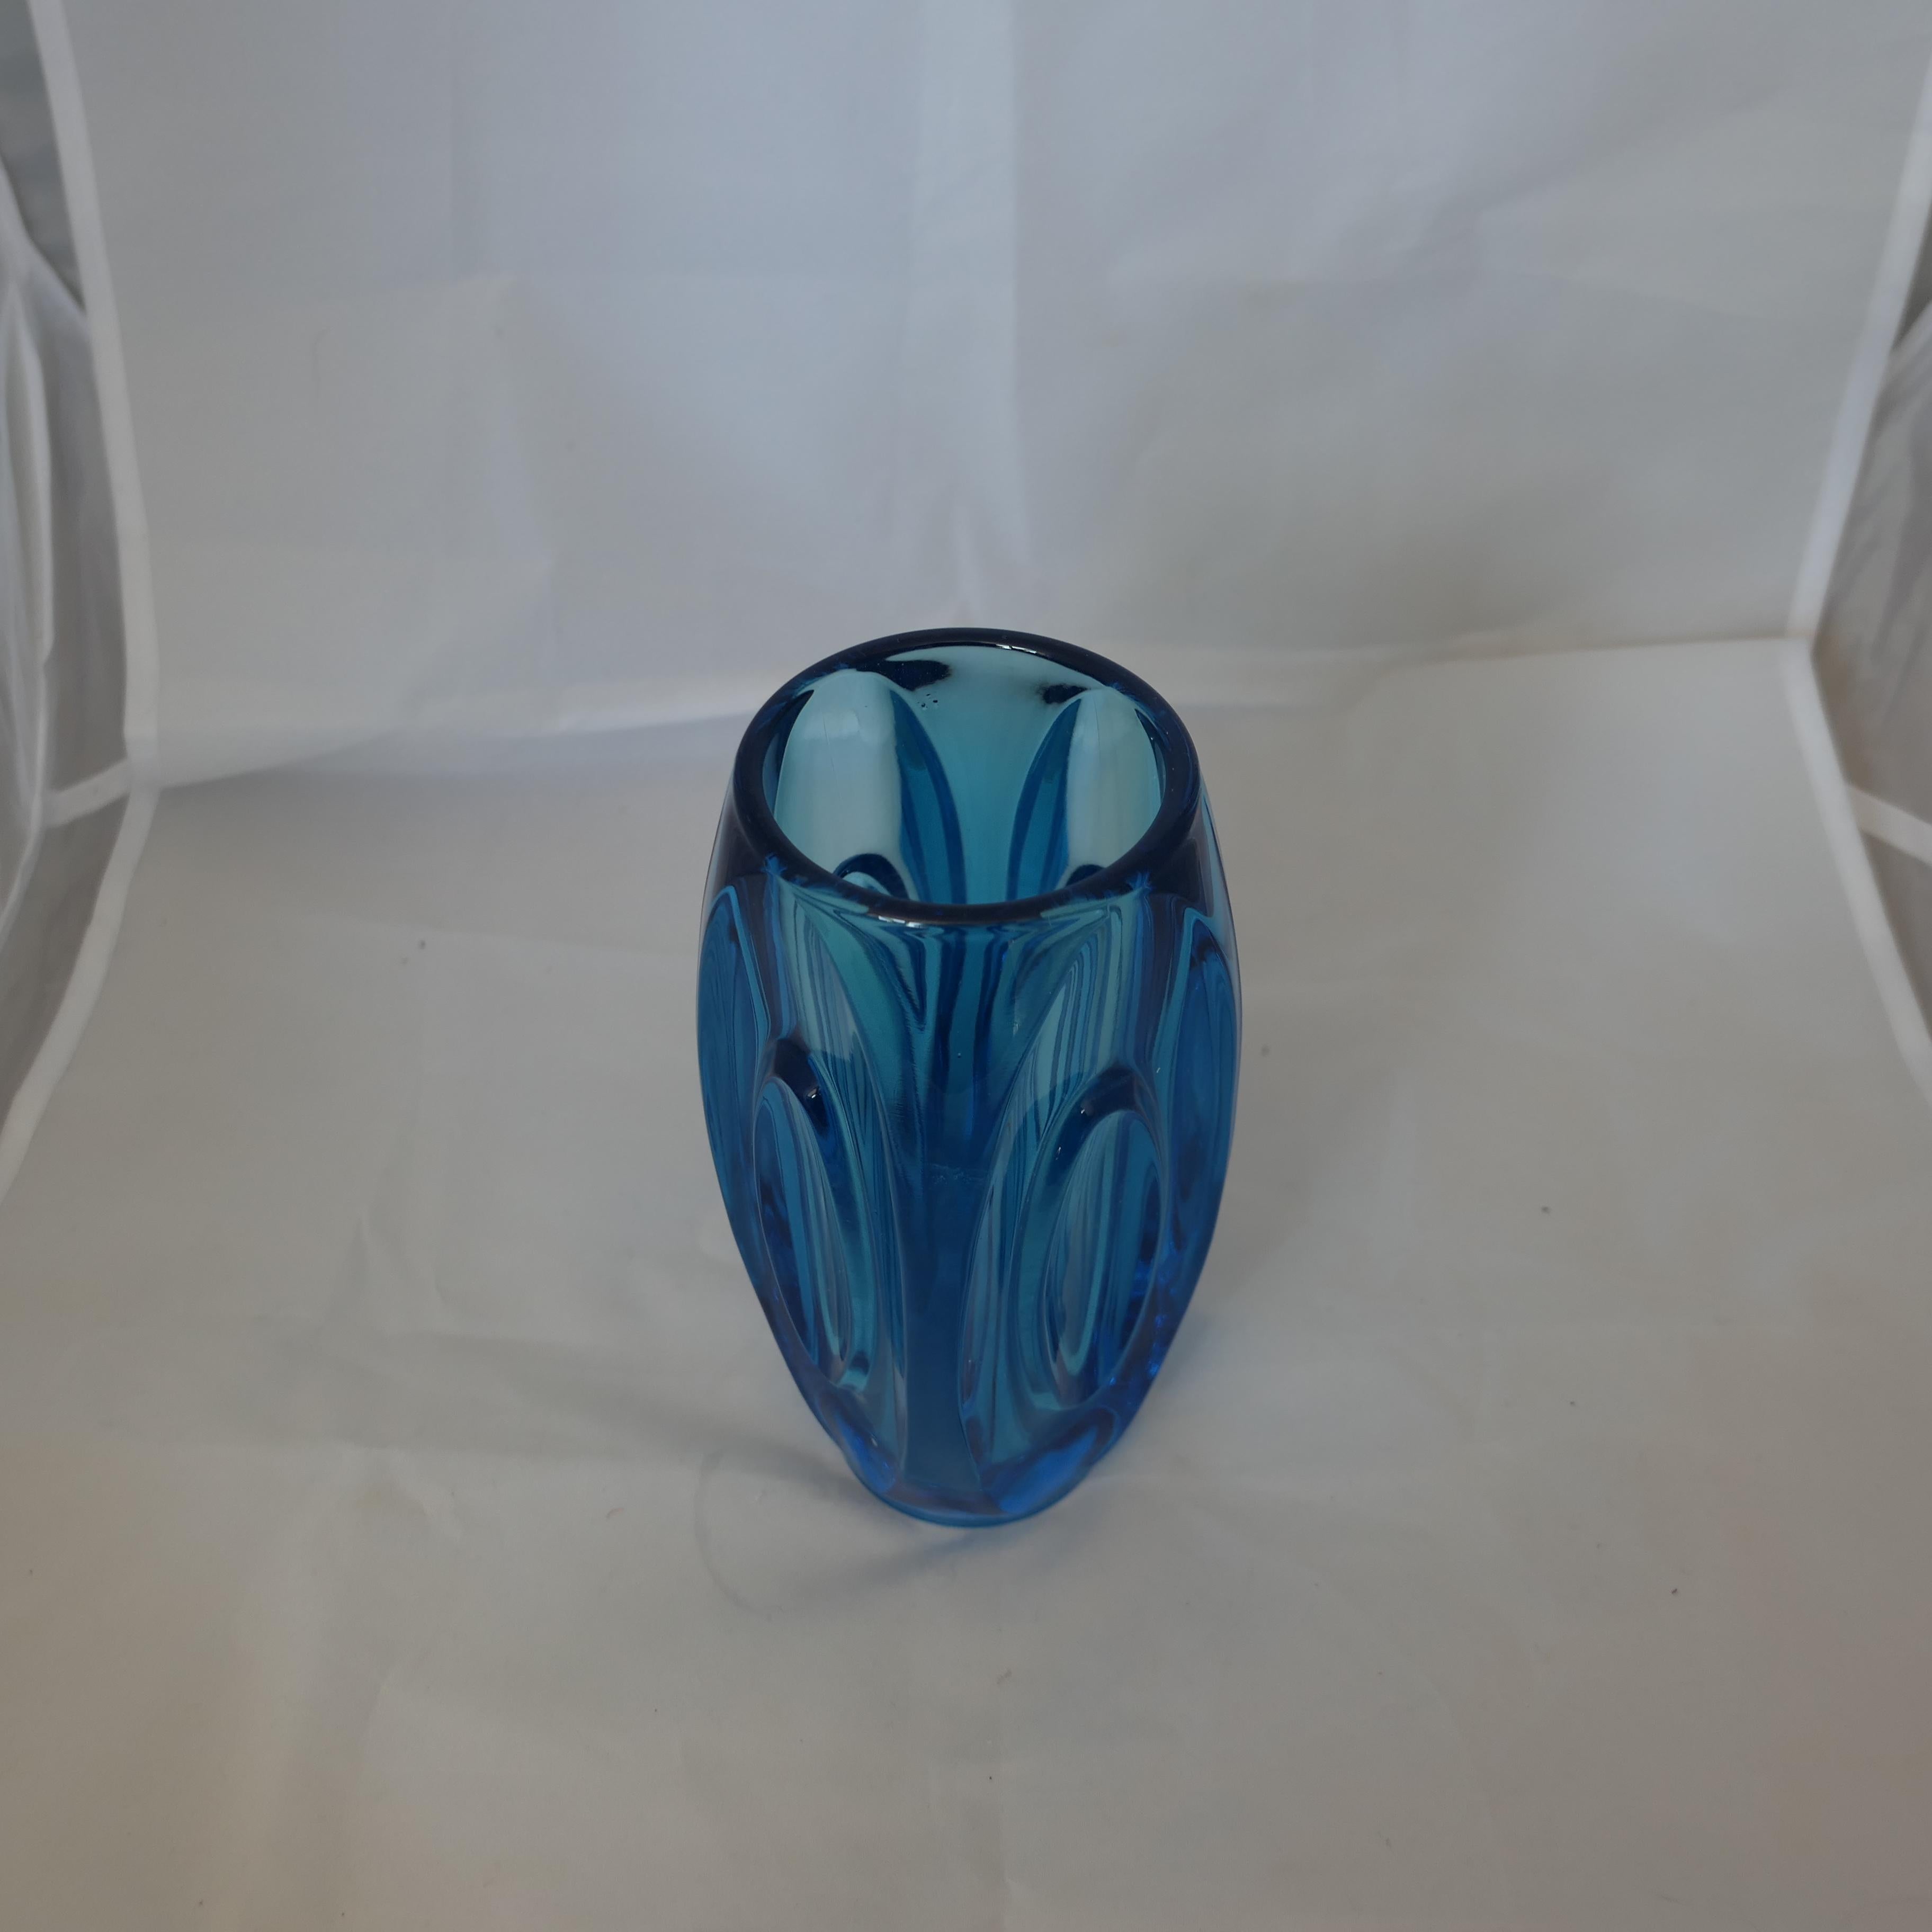 Vintage Bohemian Blue Glass Lens Bullet Vase by Rudolph Schrotter

A very stylish retro art glass blue vase by Sklo Union Rudolfova  no  chips or cracks, a lovely colour
The vase is 8” tall and 3” in diameter 
FB210
